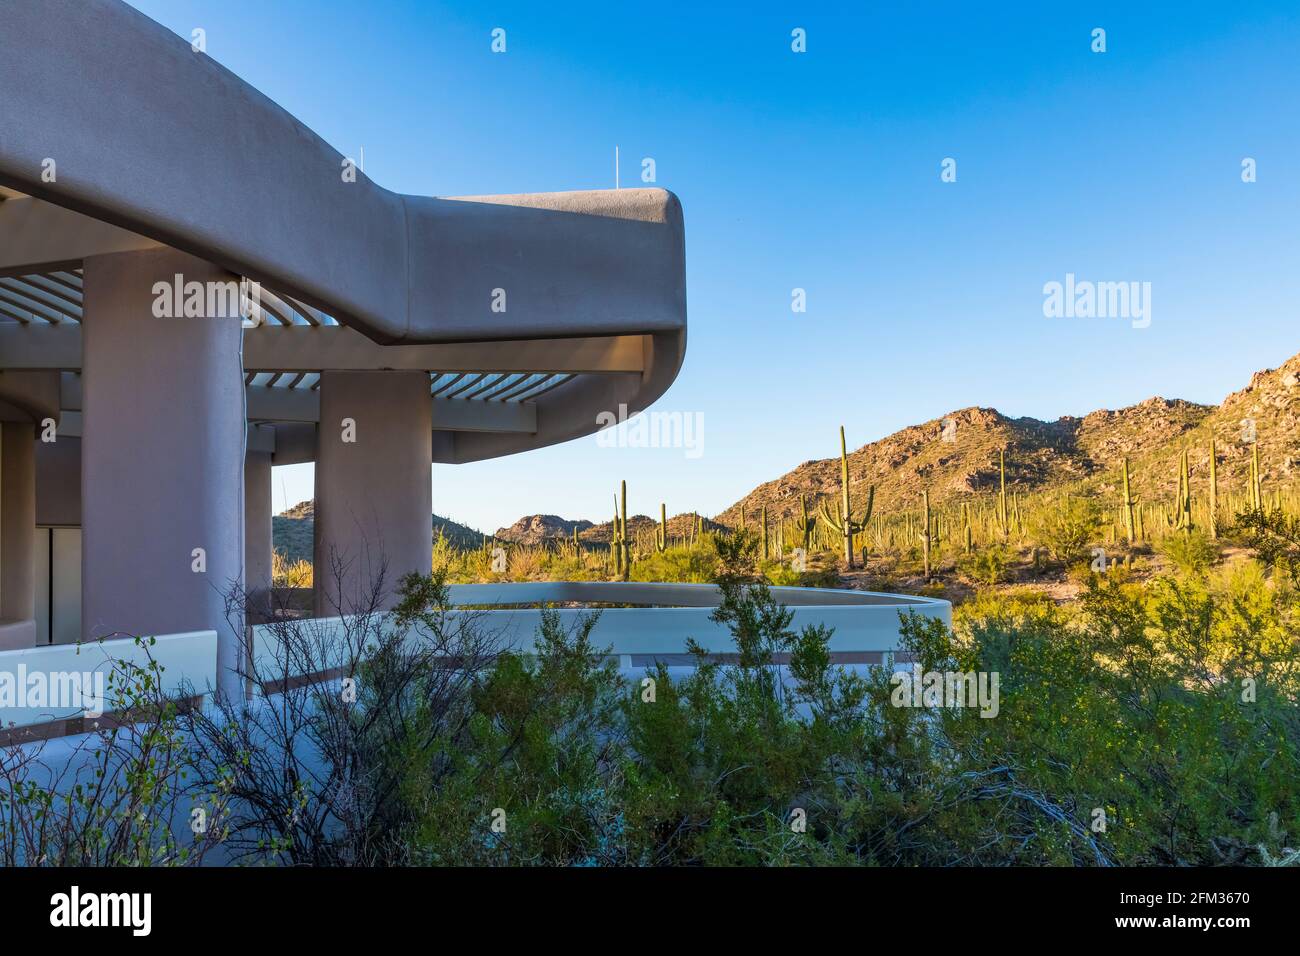 Park visitor center with information and exbibits in Tucson Mountain District of Saguaro National Park, Tucson Mountain District, Arizona, USA Stock Photo